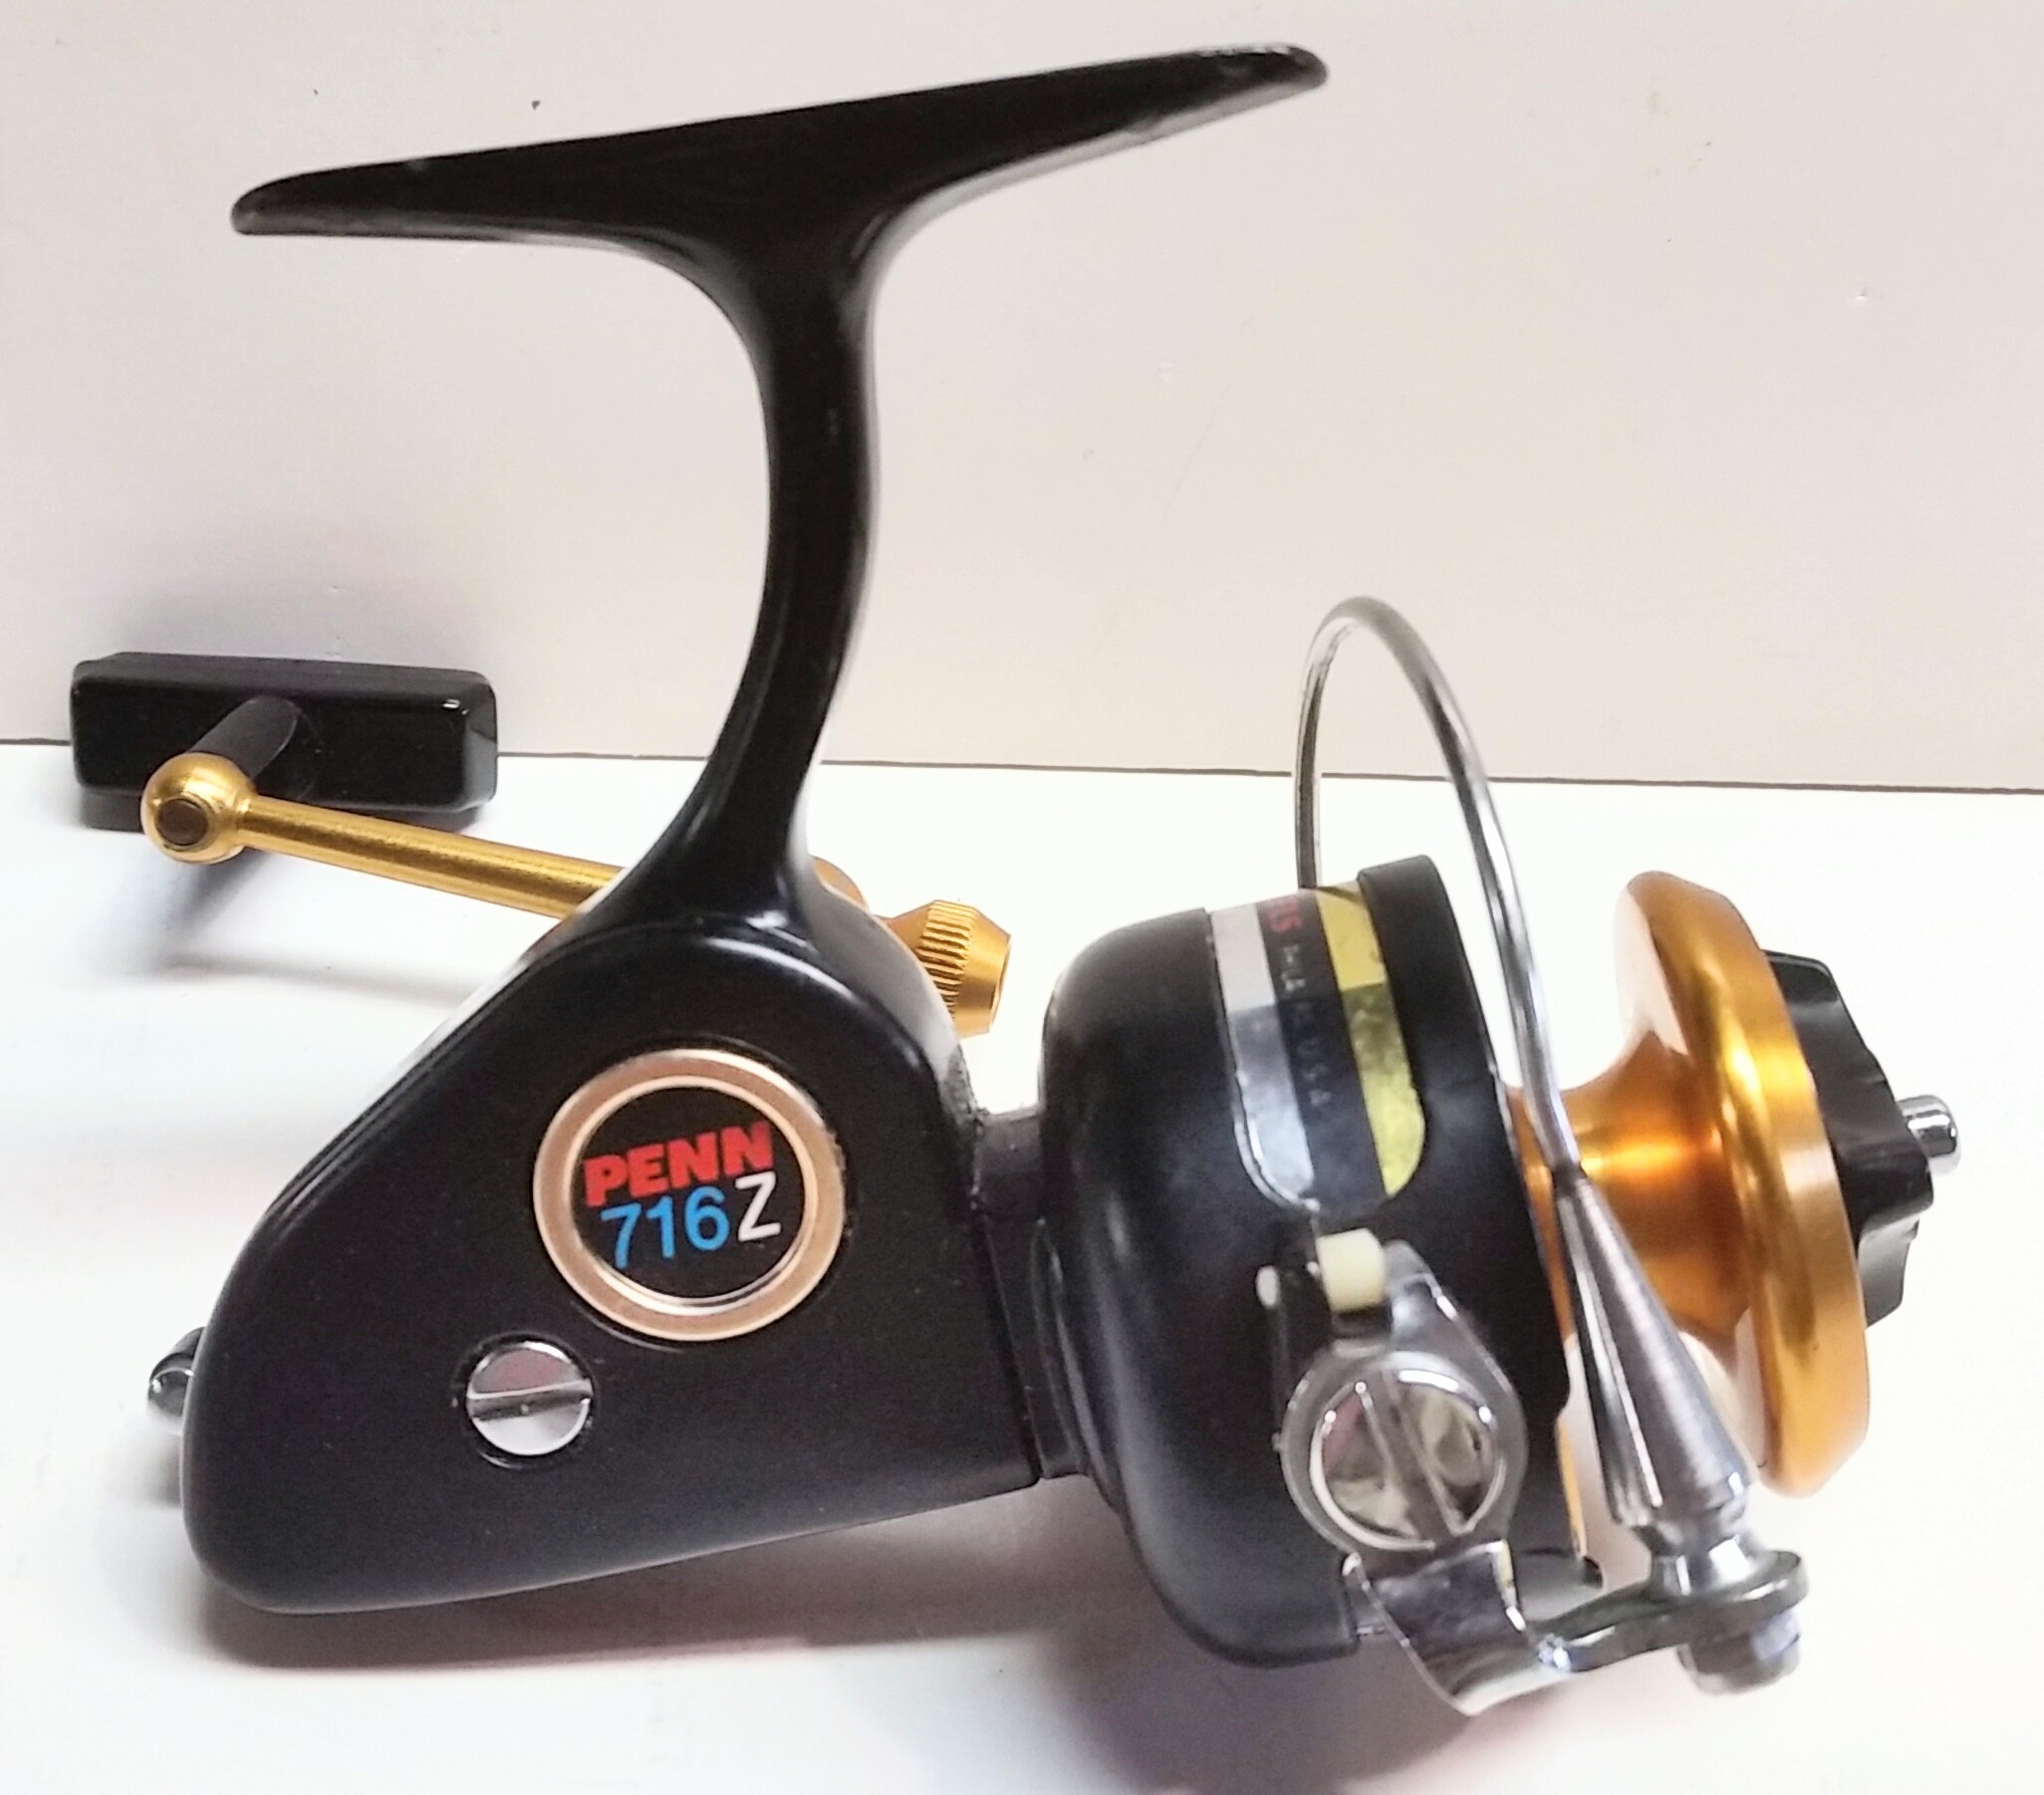 Penn 716Z Ultralight Fishing Spinning Reel With Line NOS for sale